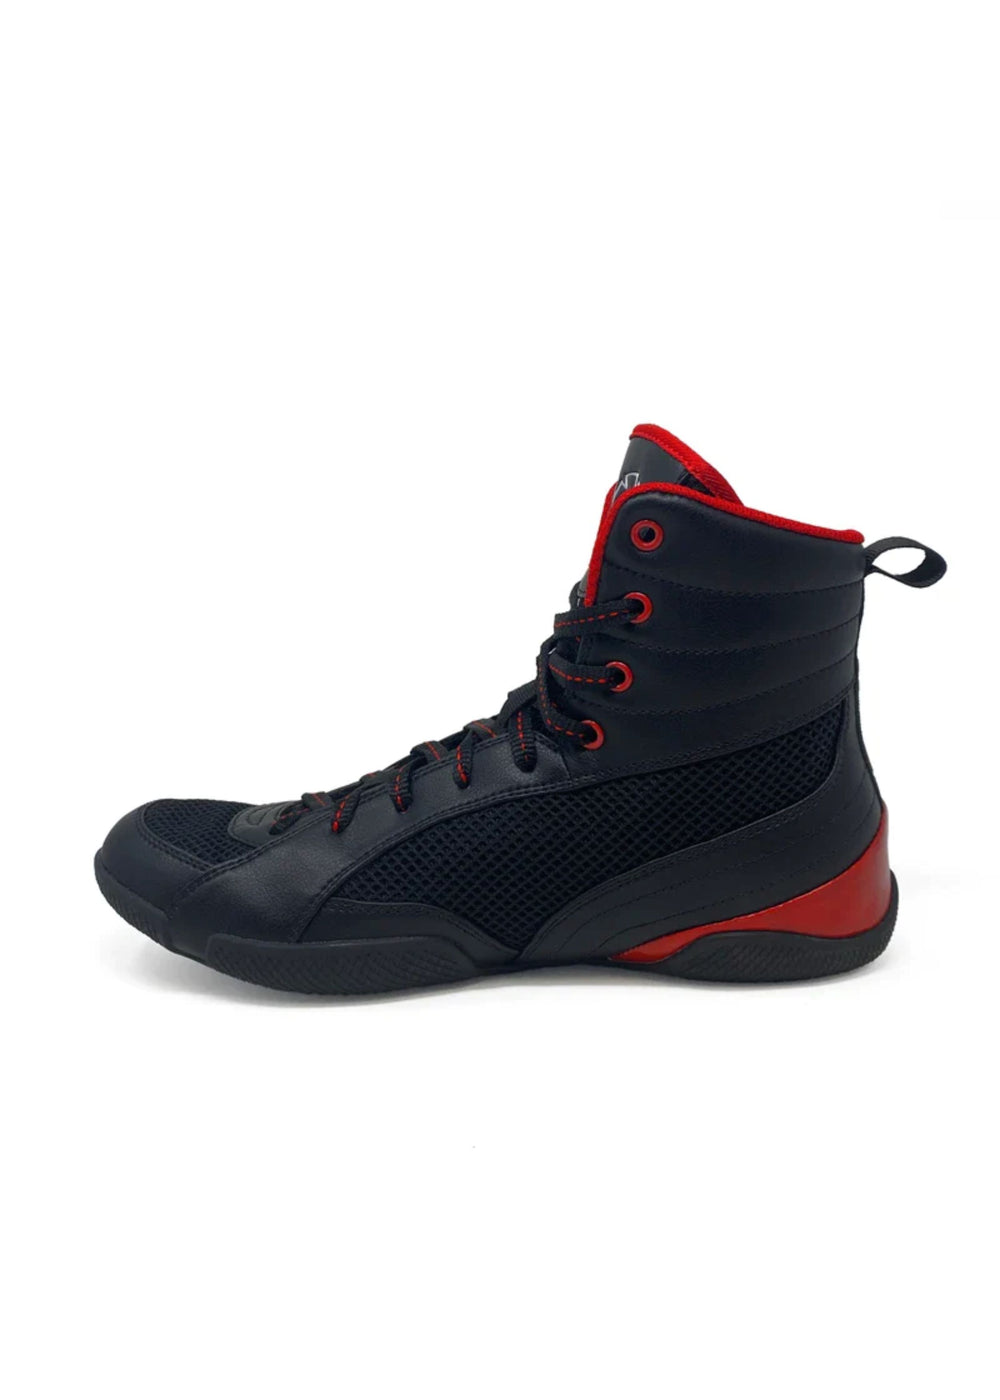 RIVAL RSX-GUERRERO DELUXE BOXING BOOTS - Black/Red